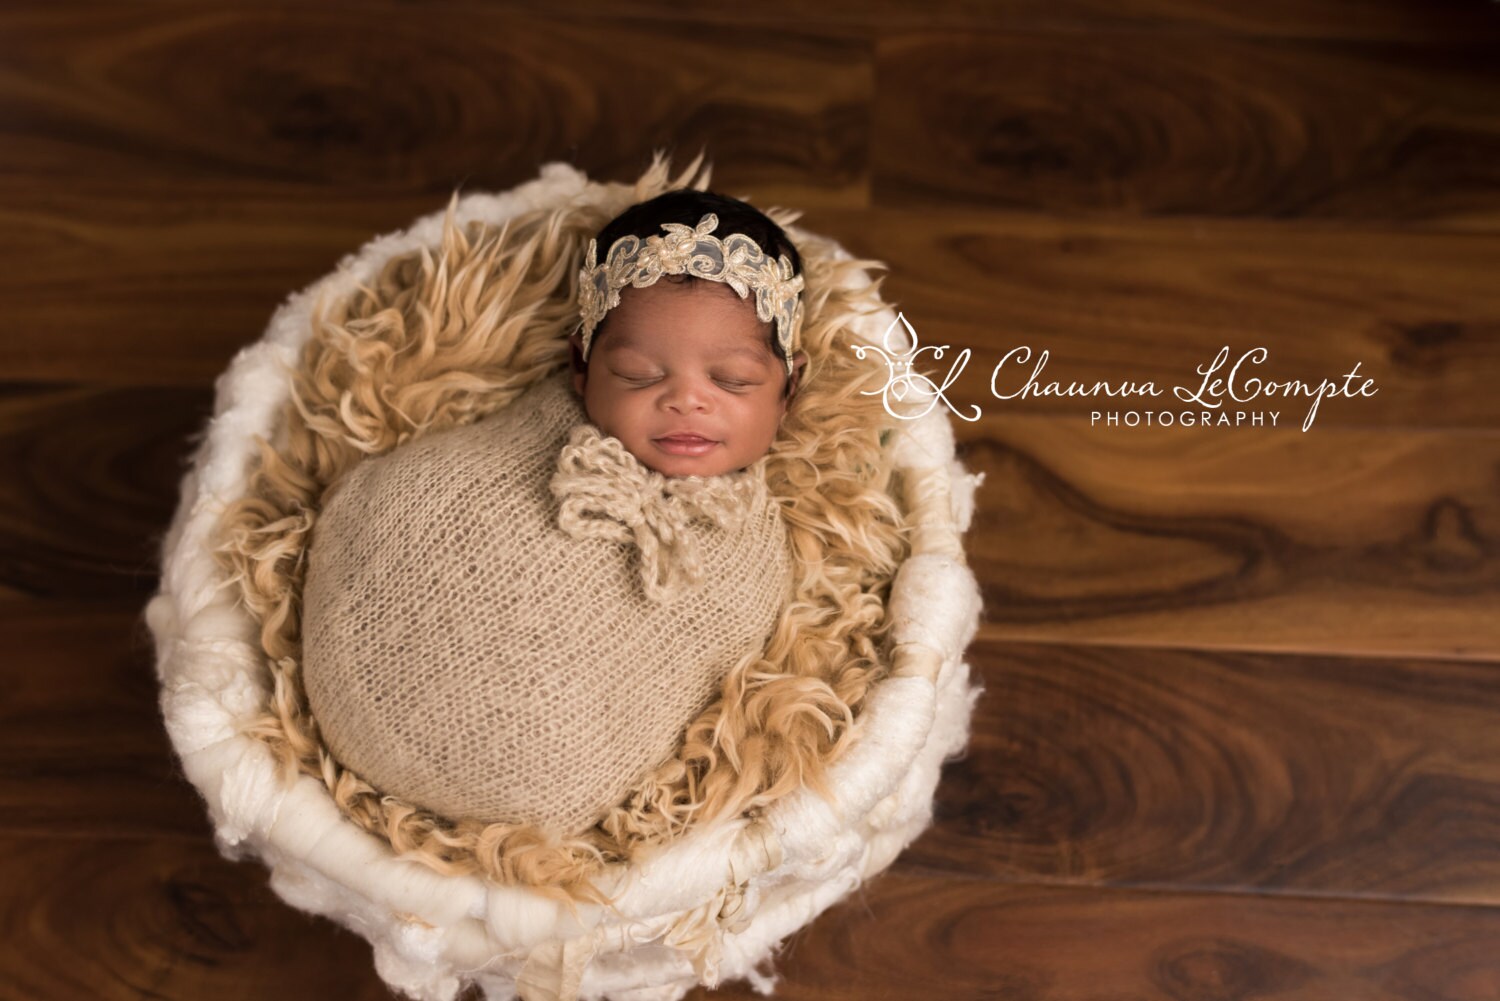 Beige Mohair swaddle Sack and Headband / Lace Headband / Newborn Photo Prop / Mohair Newborn Prop / Knit Cocoon / Newborn Sack / RTS